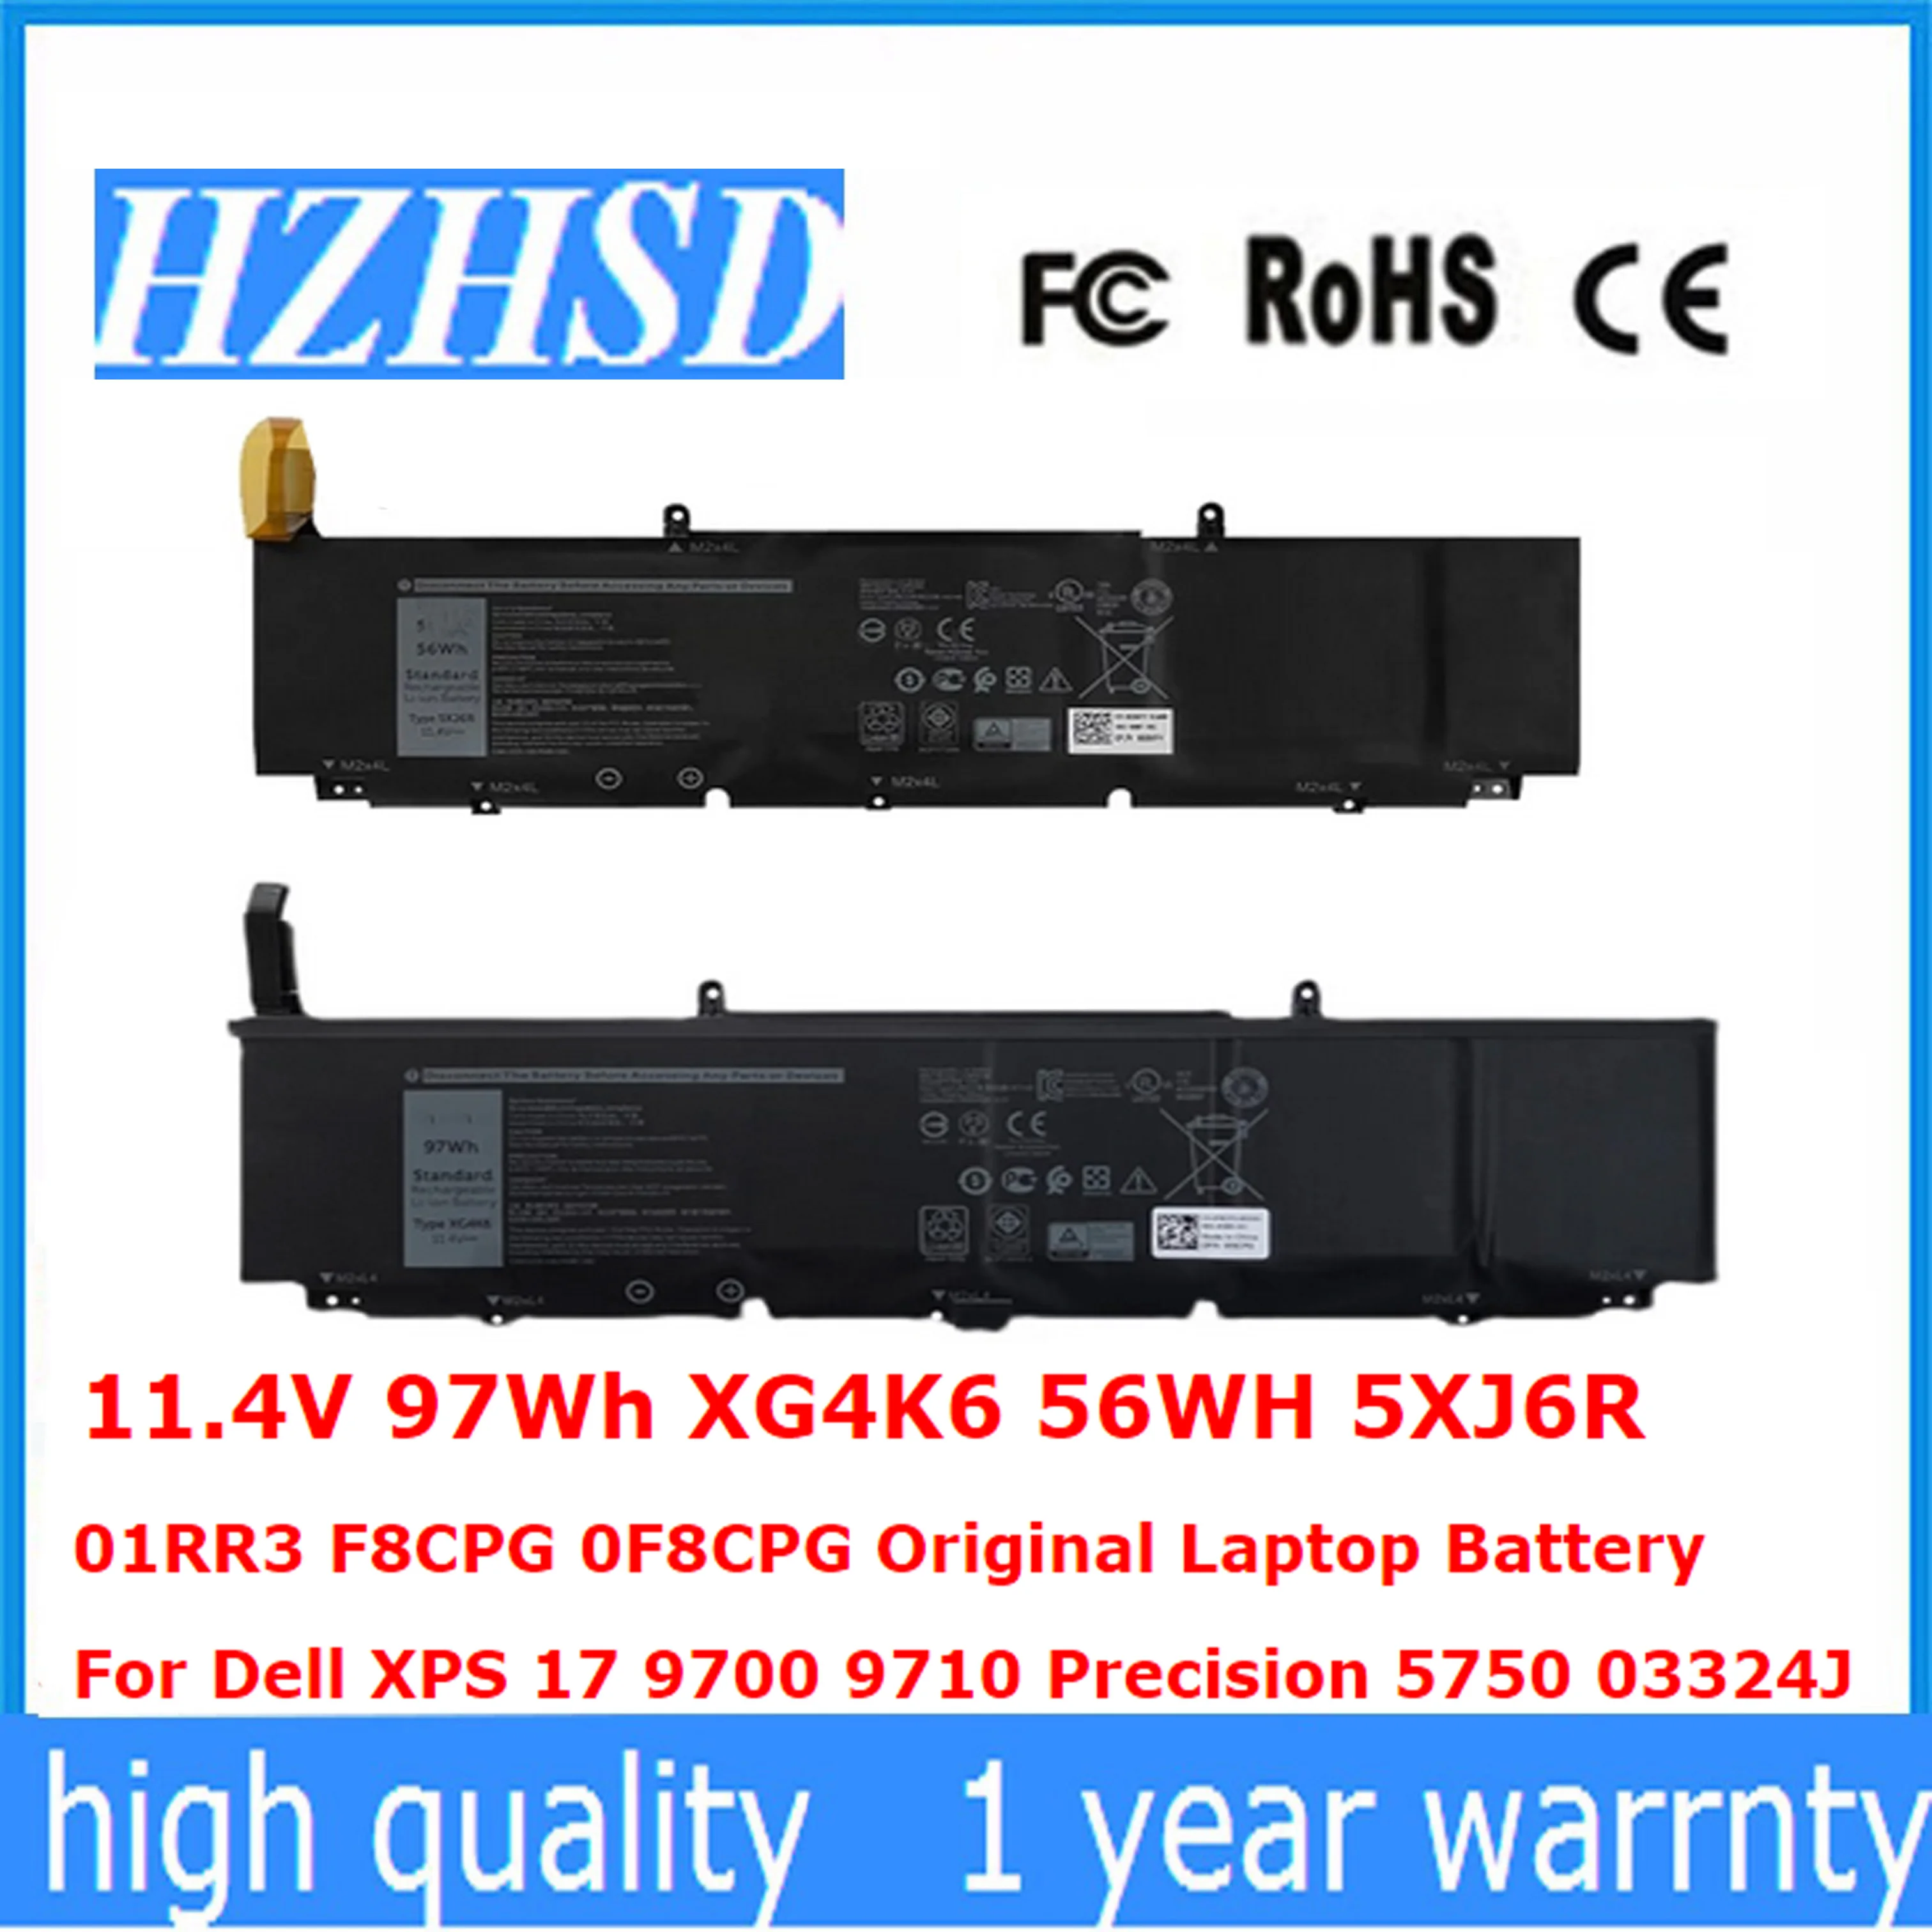 

XG4K6 11.4V 97Wh 5XJ6R 11.4V 56WH 01RR3 F8CPG 0F8CPG Original Laptop Battery For Dell XPS 17 9700 9710 Precision 5750 03324J